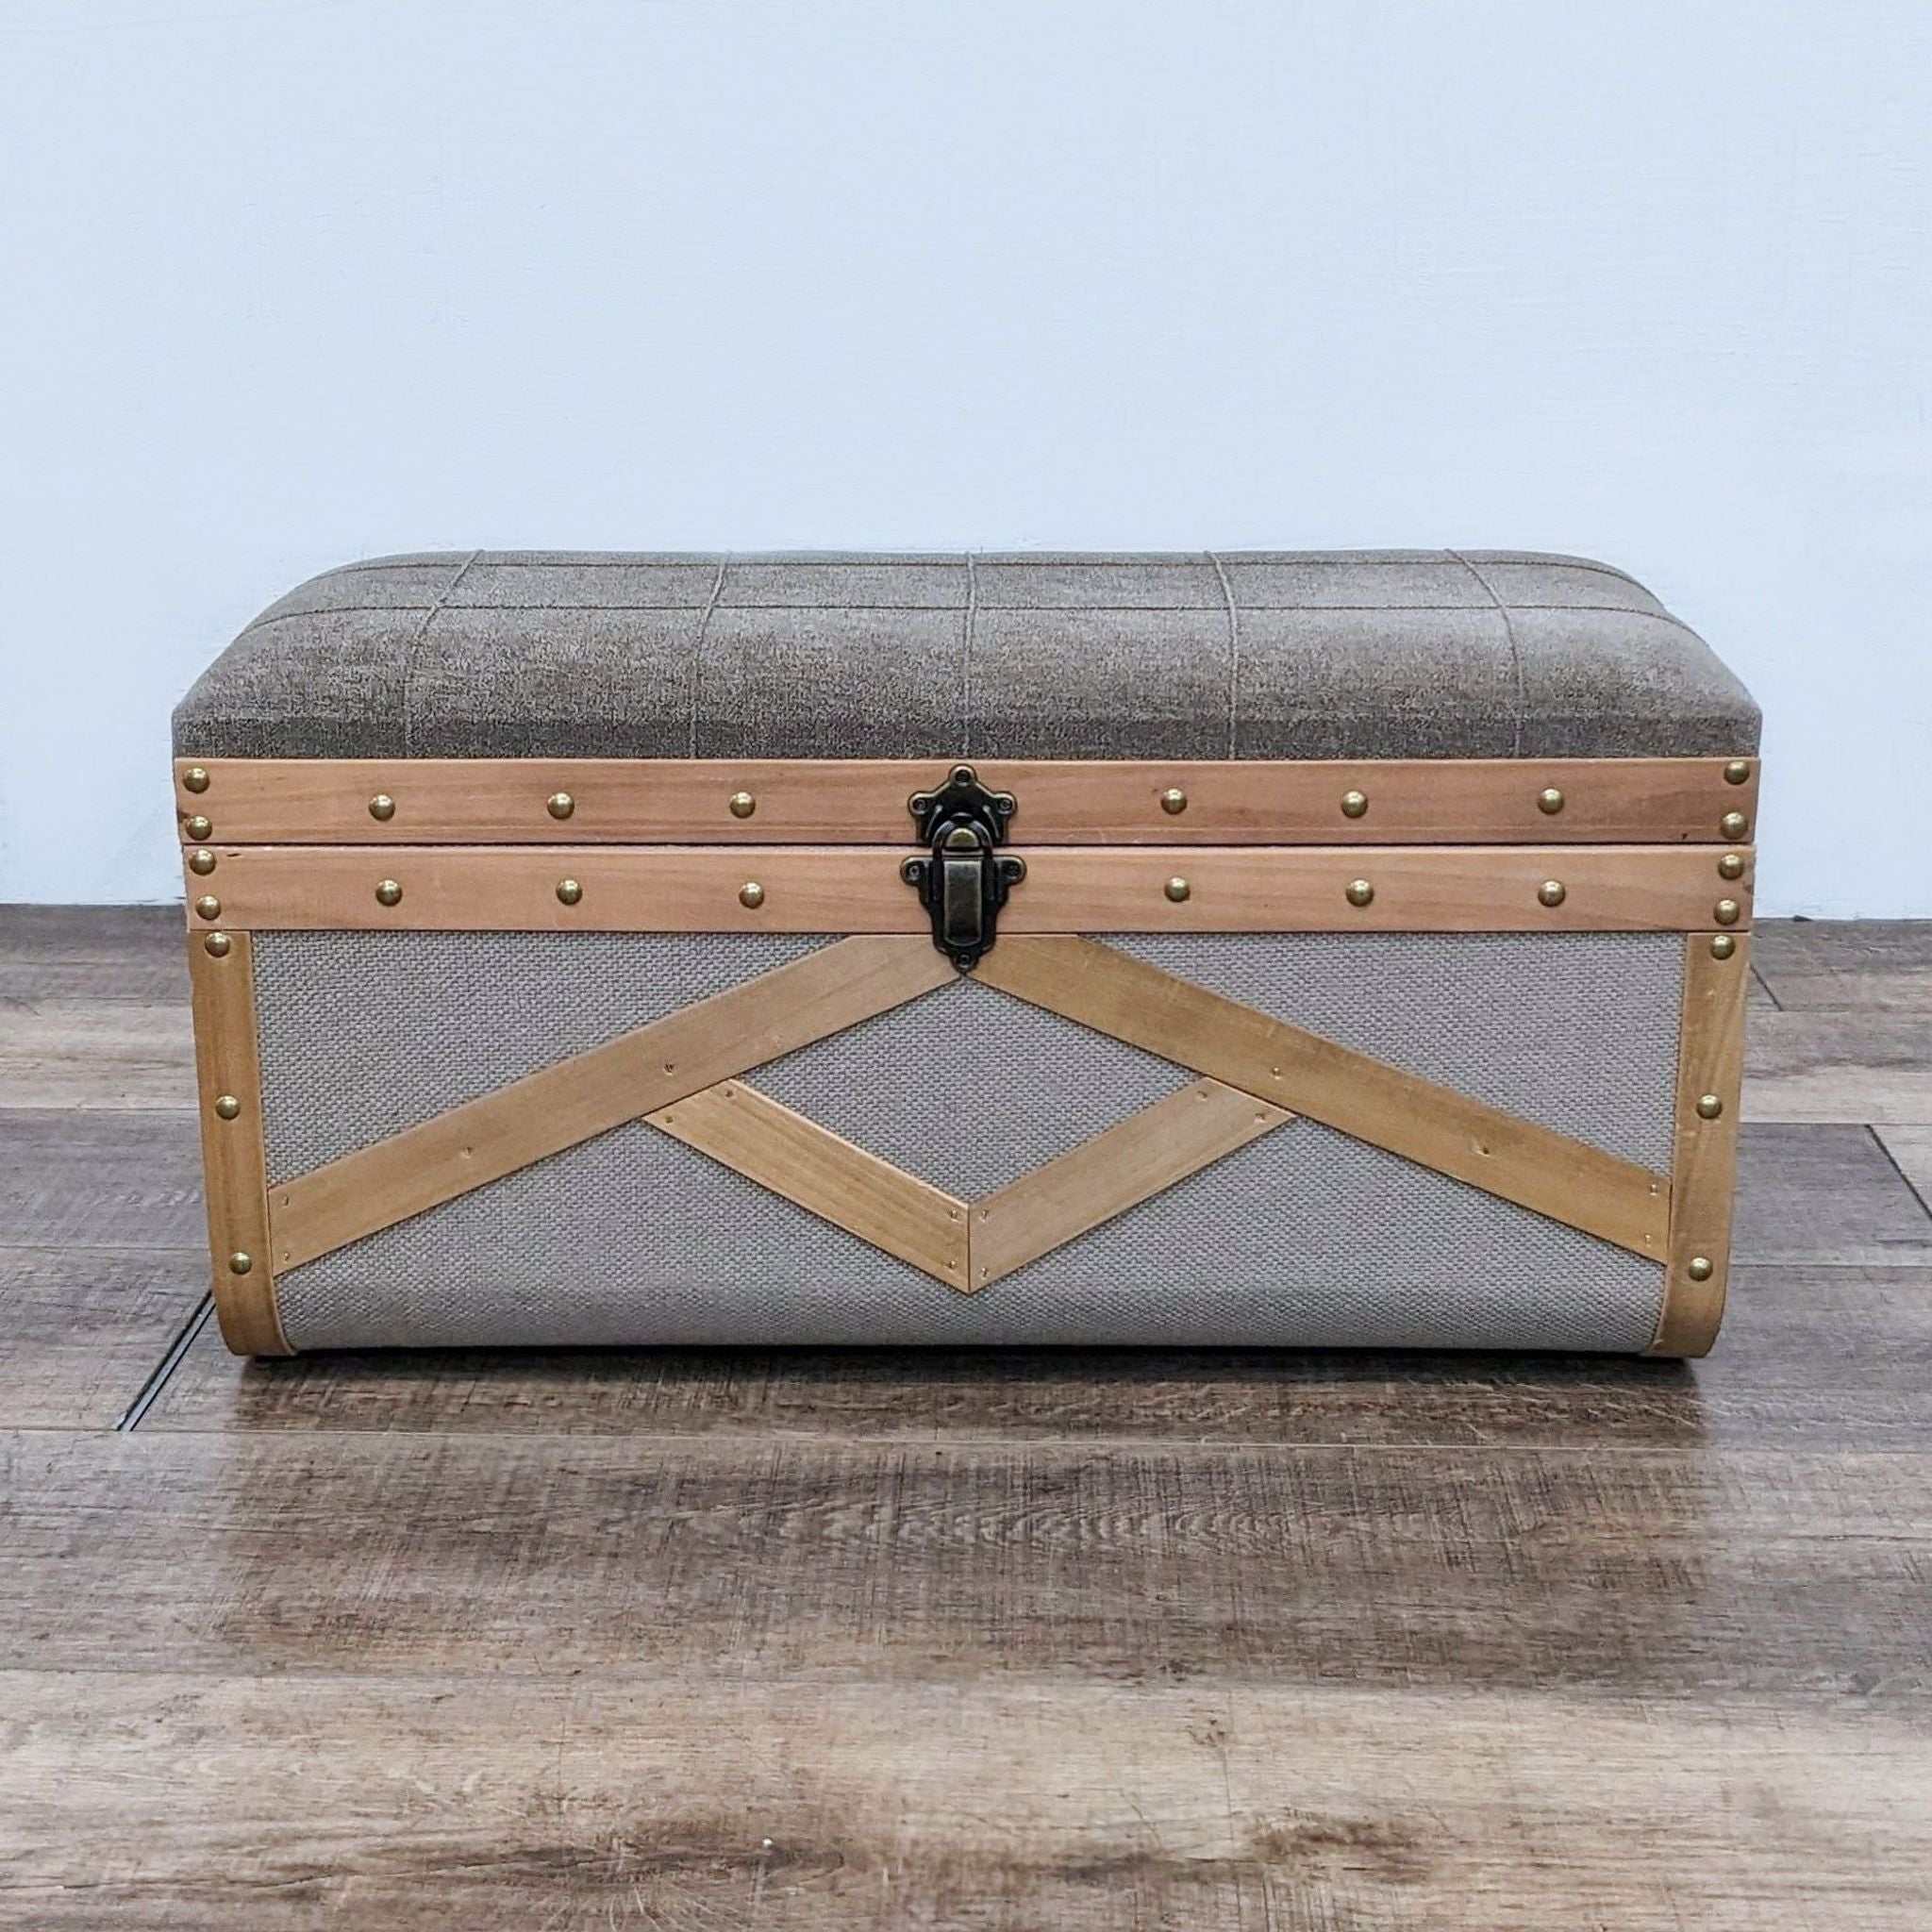 Reperch fabric trunk with wood detailing and brass nail studs, closed, on wooden floor.